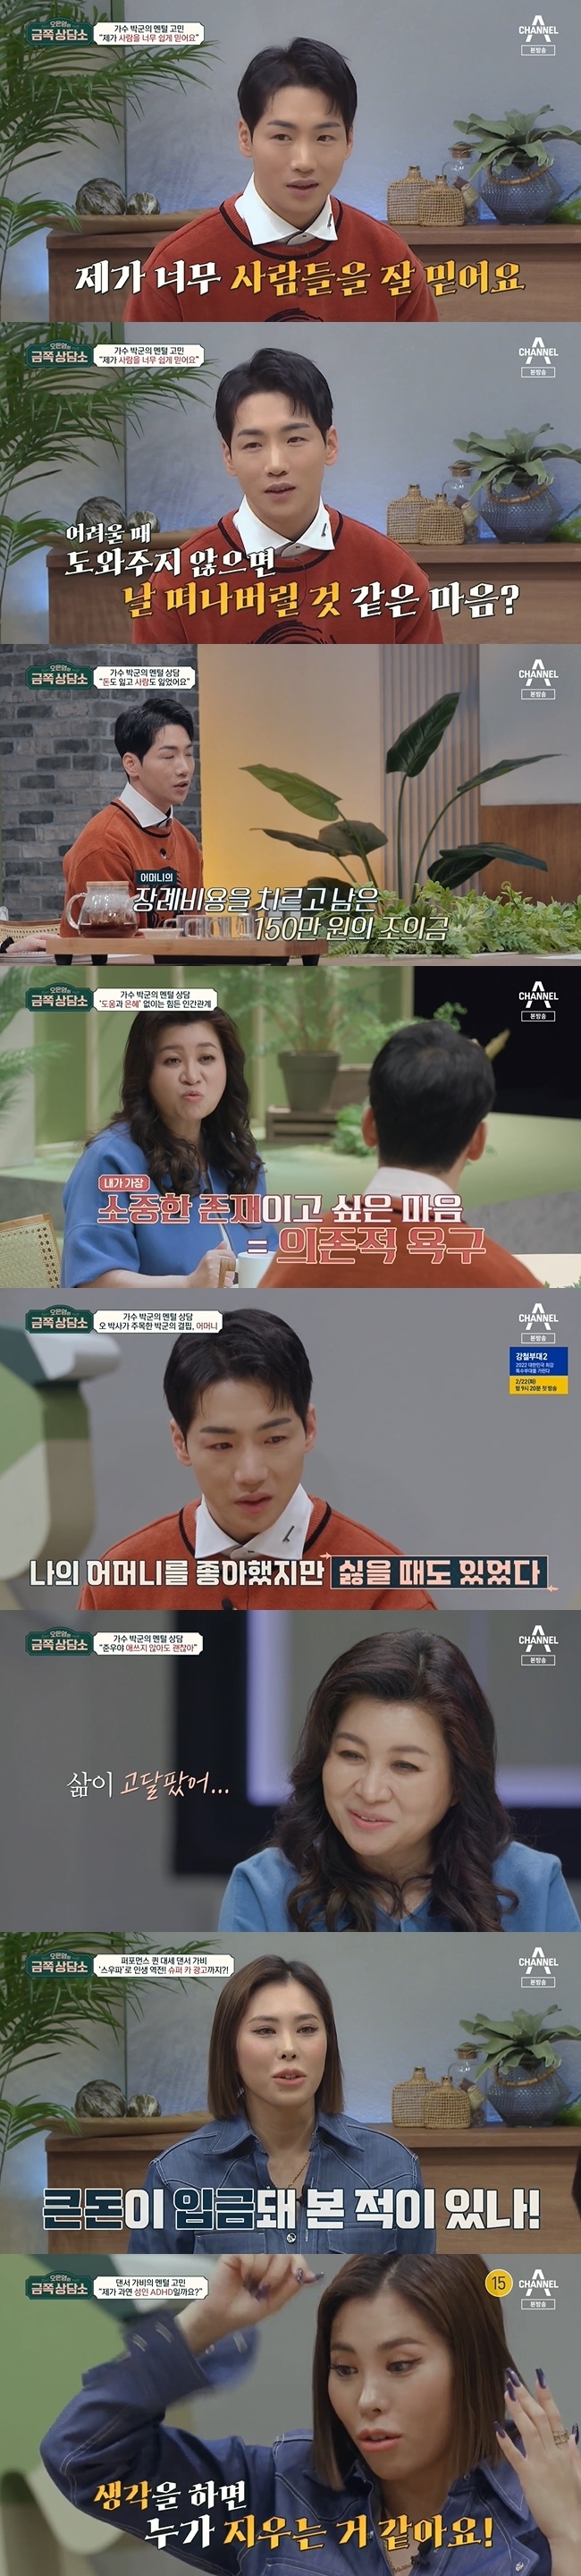 Dancer GABEE has been diagnosed with adult ADHDIn Channel As Oh Eun Youngs Gold Counseling Center, which aired on February 11, singer Park Gun and dancer GABEE appeared to reveal their troubles.Park, who has been enjoying his prime since appearing in the Steel Unit, revealed his worries that he often trusts people too much and gets hurt.Park revealed the story of Friend lent 600,000 won, which he had worked without rest for a month during high school, and after three months of suffering from his lack of living expenses, he borrowed 1.5 million won for the remaining donation after his mothers funeral to his close senior and 500,000 won for his special warrior senior.Park, who said he was afraid that people would leave when he asked, said he was not good at rejecting, saying that he was more hurt than money, and said he would try to double the amount even if he had a little help.Oh Eun Young Doctorate said, I live too much in paying grace.I think that I should keep my mind if I can not afford to be comfortable with it and pay it back, and I think that my mind will be comfortable. He pointed out that human and human relations are not related to a comfortable Friend, but are helped and benefited.In the analysis that he always tries to fill the dependent desire, Park explained that the society facing after the war is more like a battlefield and uneasy, and sympathized that he would rely more on small things.In the dependence desire checklist, Park had a lot of weight and poor rejection when making decisions, especially in sentence tests, there were many items related to the mother who died of poison.When the story of her mother came out, Park, who had a red eye, said that she had not had much emotional communication with her mother because of her tight life.Oh Eun Young Doctorate said, My life was hard, but thank you for growing up with a positive heart.People like you and are glad to see you, even if you dont try, and you dont have to be comfortable and pay back.The second GABEE appeared lively, revealing a passionate fanfare for Oh Eun Young Doctorate.GABEE, whose daily life has changed 180 degrees since Street Woman The Fighter (hereinafter referred to as SUfa), said that it feels the biggest change in meeting entertainers who have not seen before and depositing large amounts of money into the bankbook.GABEE has released the topic of concern: Will I ever be an adult ADHD? GABEE said, When I was a child, it was just my personality.But I feel more when I became an adult and took Sfa last year.When I choreograph with my team members, I have to draw my composition in my head, but I can not concentrate and concentrate.  I think it is a handwriting somehow, but if I think about it, it seems that someone erases it with an eraser.I am so embarrassed and hate that I am so embarrassed when I am practicing with people. I am sorry for people. GABEE, who is already saying that, is also considering whether to say something that comes to mind, but has mentioned the recently controversial Street Dance Girls The Fighter (hereinafter referred to as Sugalpa).When Monica pointed out that it was unfair competition for the opponent team to have choreographed the level of intention at the time, GABEE was unilaterally controversial because it was one of its crew.I just saw the kids, GABEE said, and I think they were talking about it because they seemed to be hurting the kids I was in charge of.I think theres impulsiveness and a lot of talk, he regretted.Oh Eun Young Doctorate looked at adult ADHD checklists with GABEEGABEE, who checked the items that did not keep the time promise well, admitted that it was always late for the appointment because there were many things to start and forget when it could arrive on time without predicting the sudden situation.I acknowledged that I was not good at managing money, and when I could not go to study abroad due to visa problems, I brought out the story of the 20 million won study abroad and the change of name that I used improvisedly to buy a car.Oh Eun Young Doctorate explained that adult ADHD often receives Misunderstood due to speech mistakes and asked some public why GABEEs words sounded uncomfortable.GABEE said, I think there are some things that have been wrapped around (the kids) and I dont know, actually, there are many reasons, but it seems difficult to pick one up correctly.Oh Eun Young Doctorate says, It is not violent or violent, but it seems a little impulsive.When the language impulsiveness comes out because the response is fast and the speech is not able to be spoken, the listener can feel like he is being attacked. GABEE shed tears.